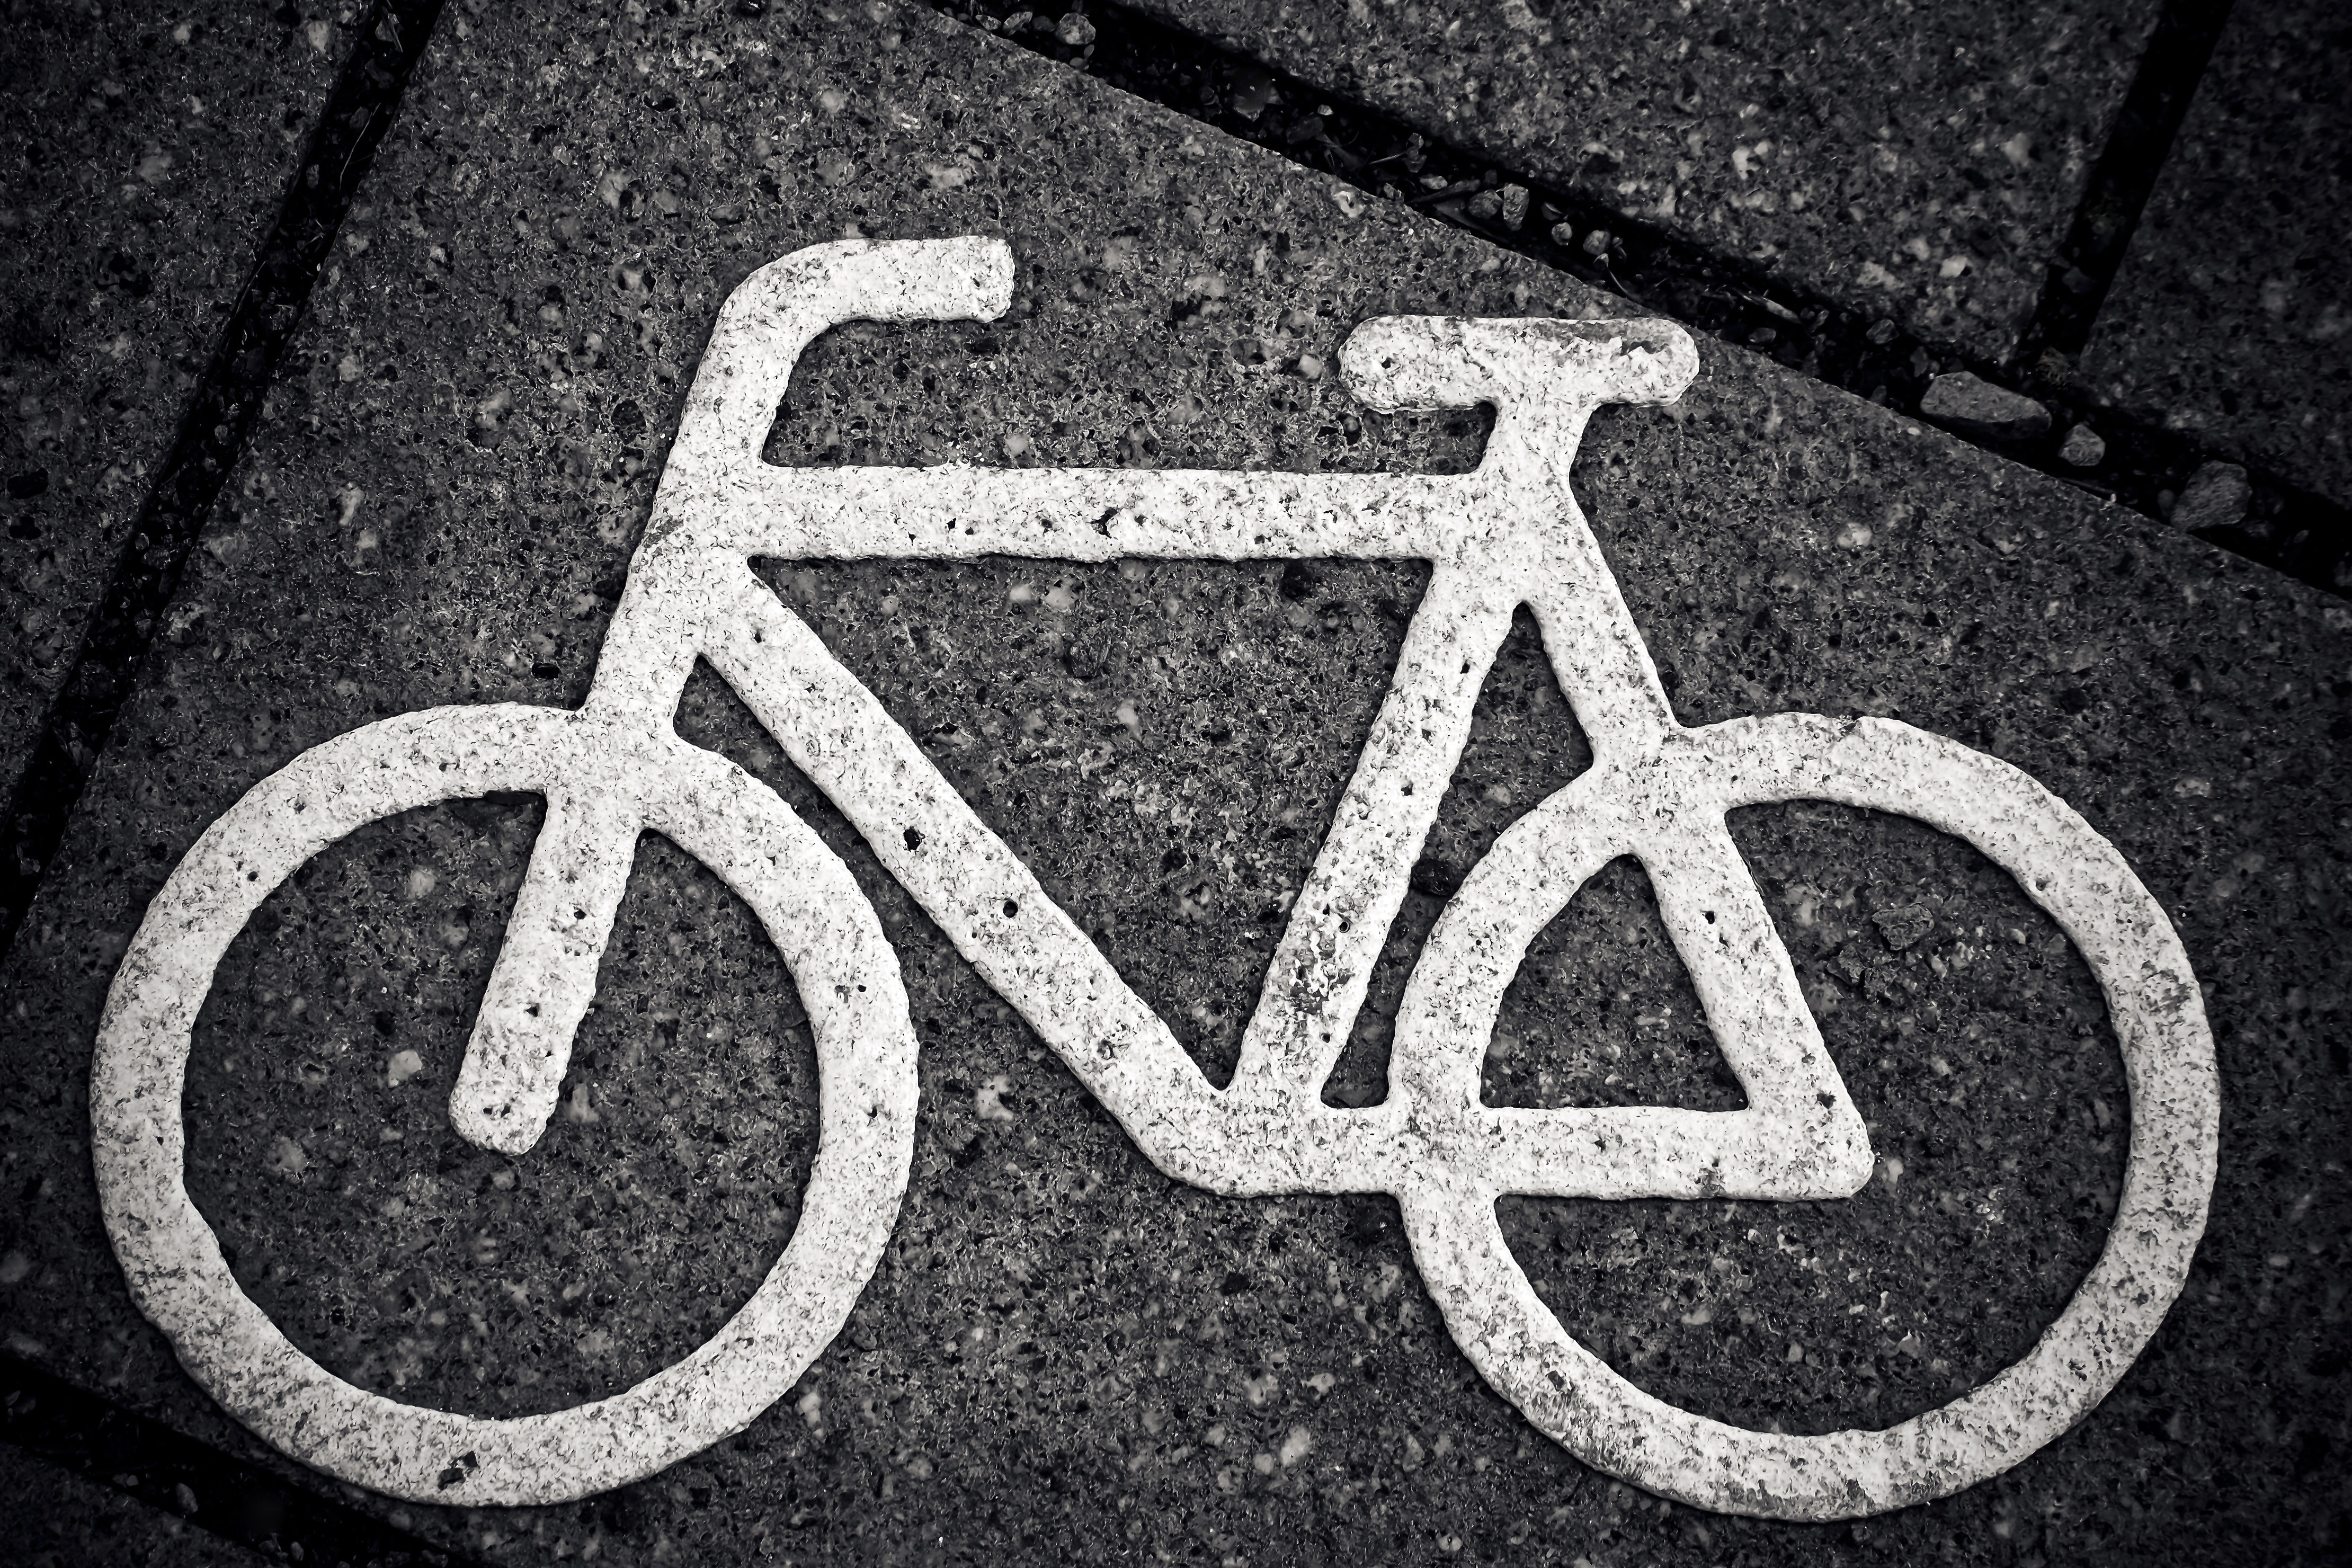 stenciled image of a bicycle